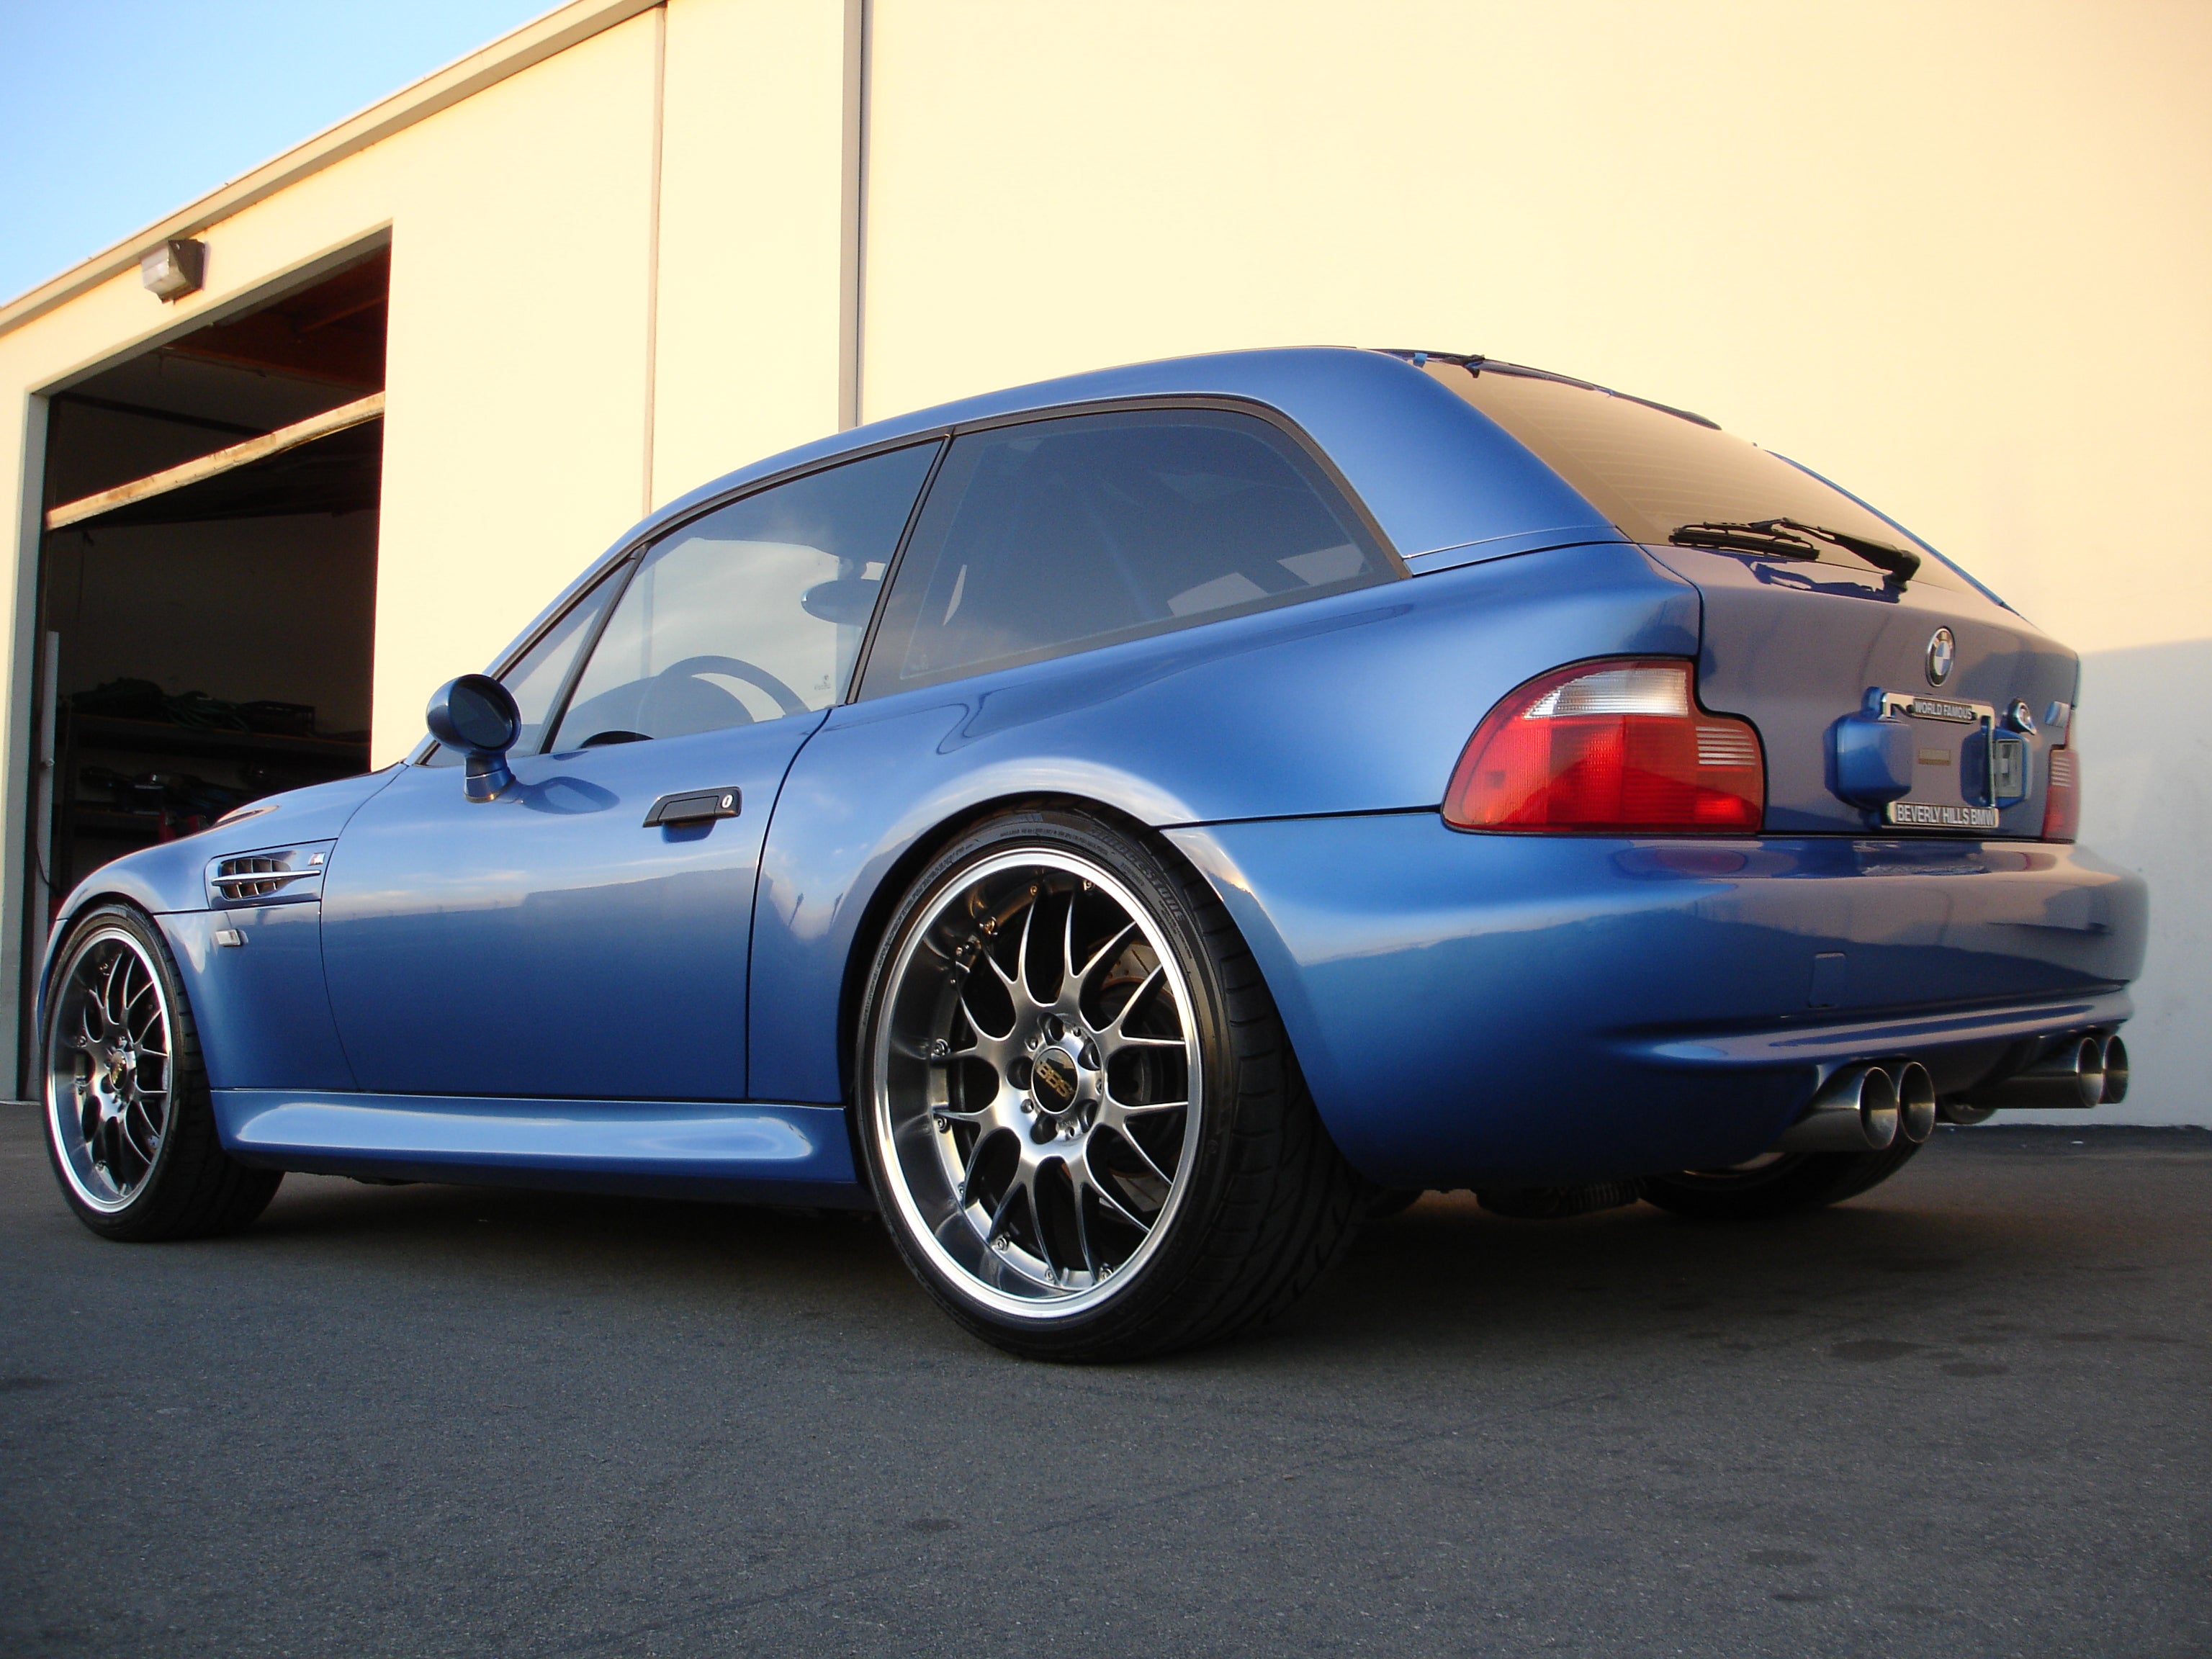 1997 BMW Z3 Roadster 'Supercharged